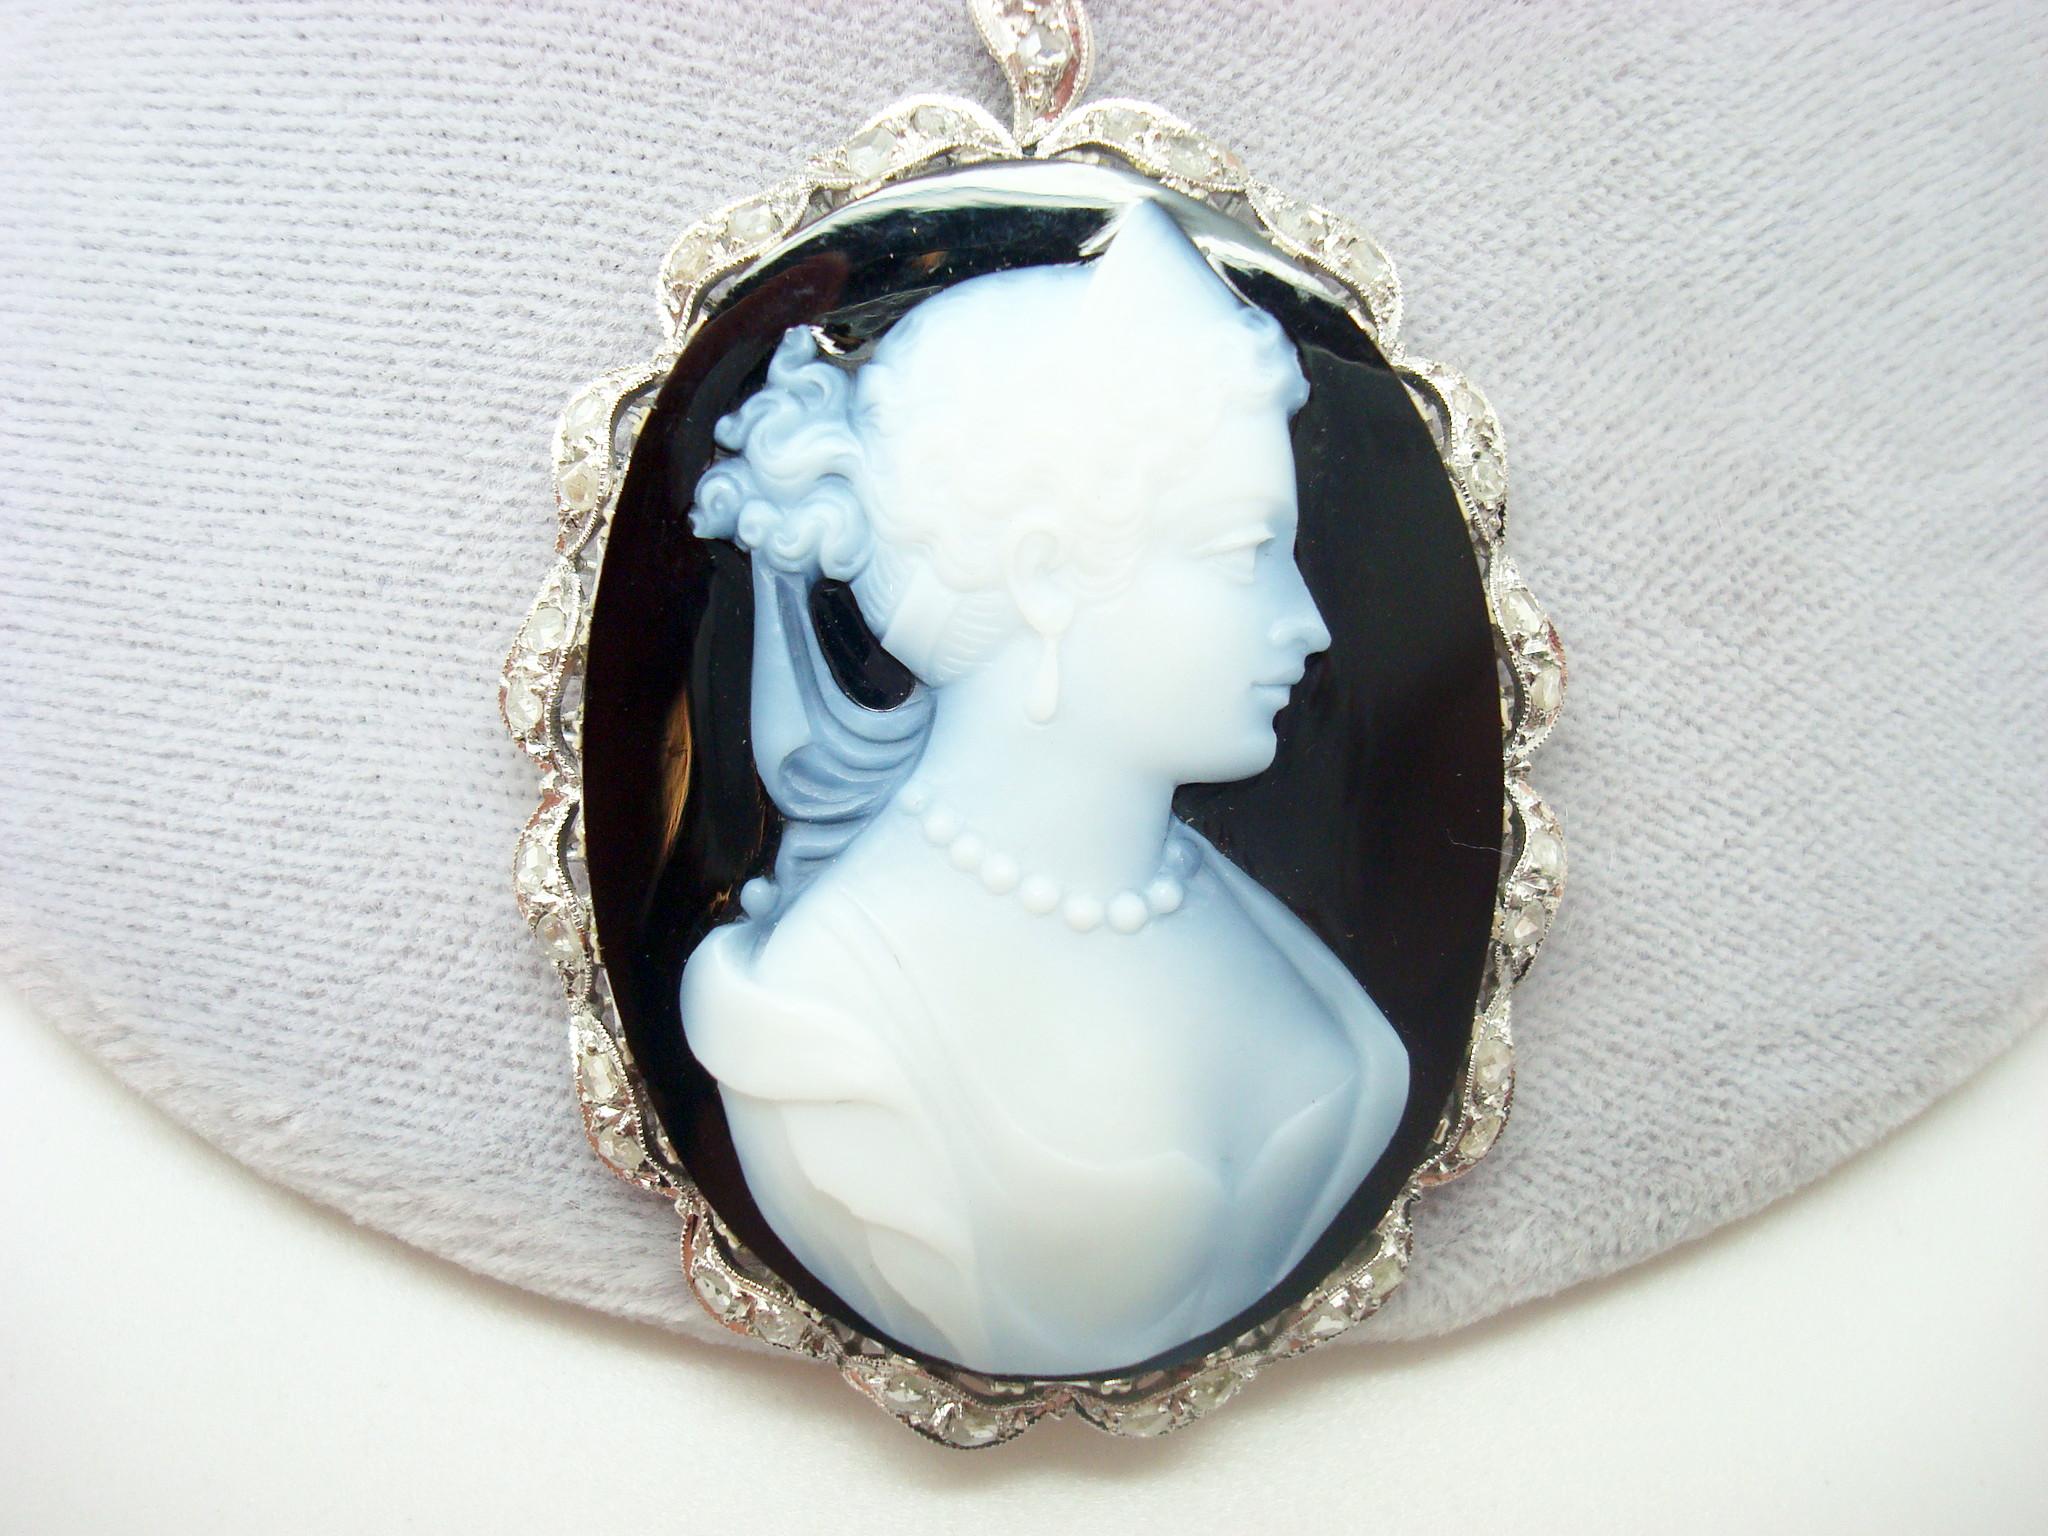 18k White Gold Genuine Natural Agate Stone Cameo Diamond Pendant (#J2463)

18k white gold black and white hard stone cameo pendant. It is finely made and it features a large oval black and white banded agate stone cameo. The cameo measures about